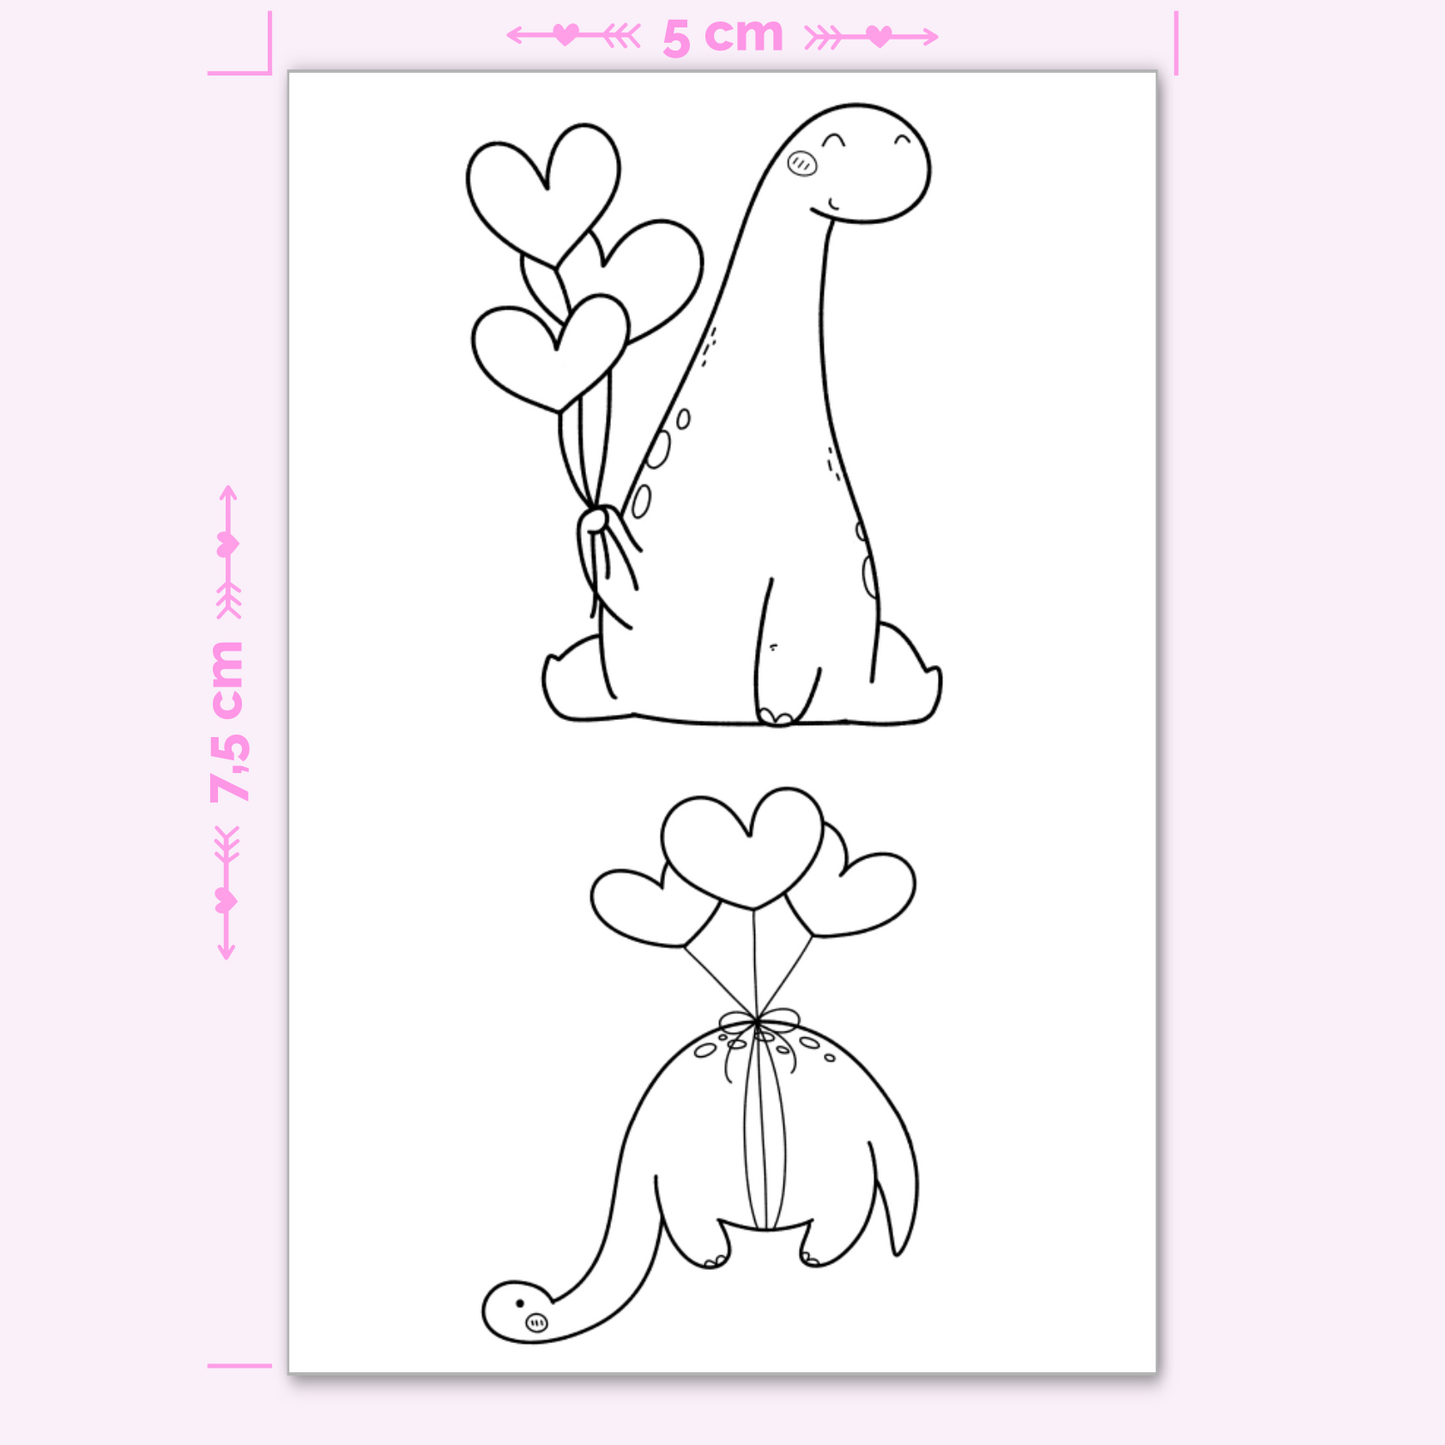 Cute Dinos with Balloons - 2 Tattoos (mini)